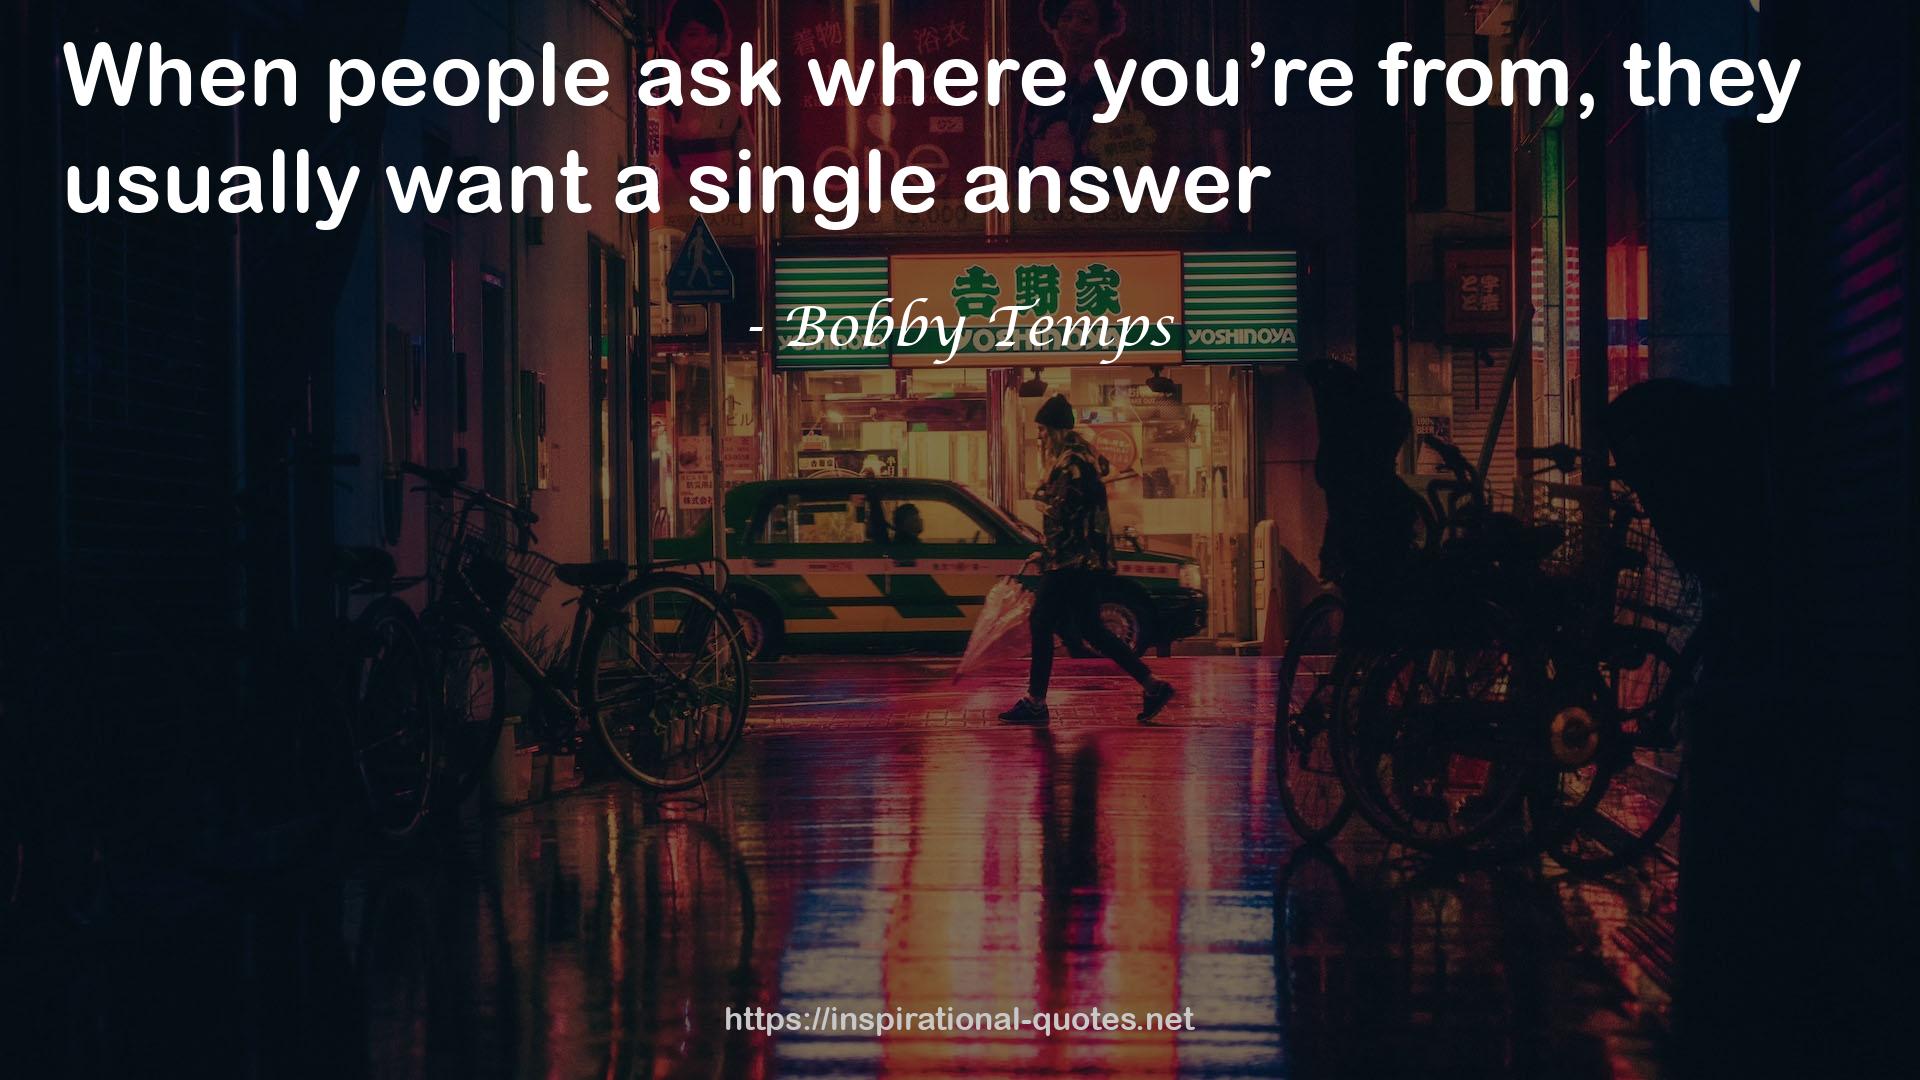 Bobby Temps QUOTES